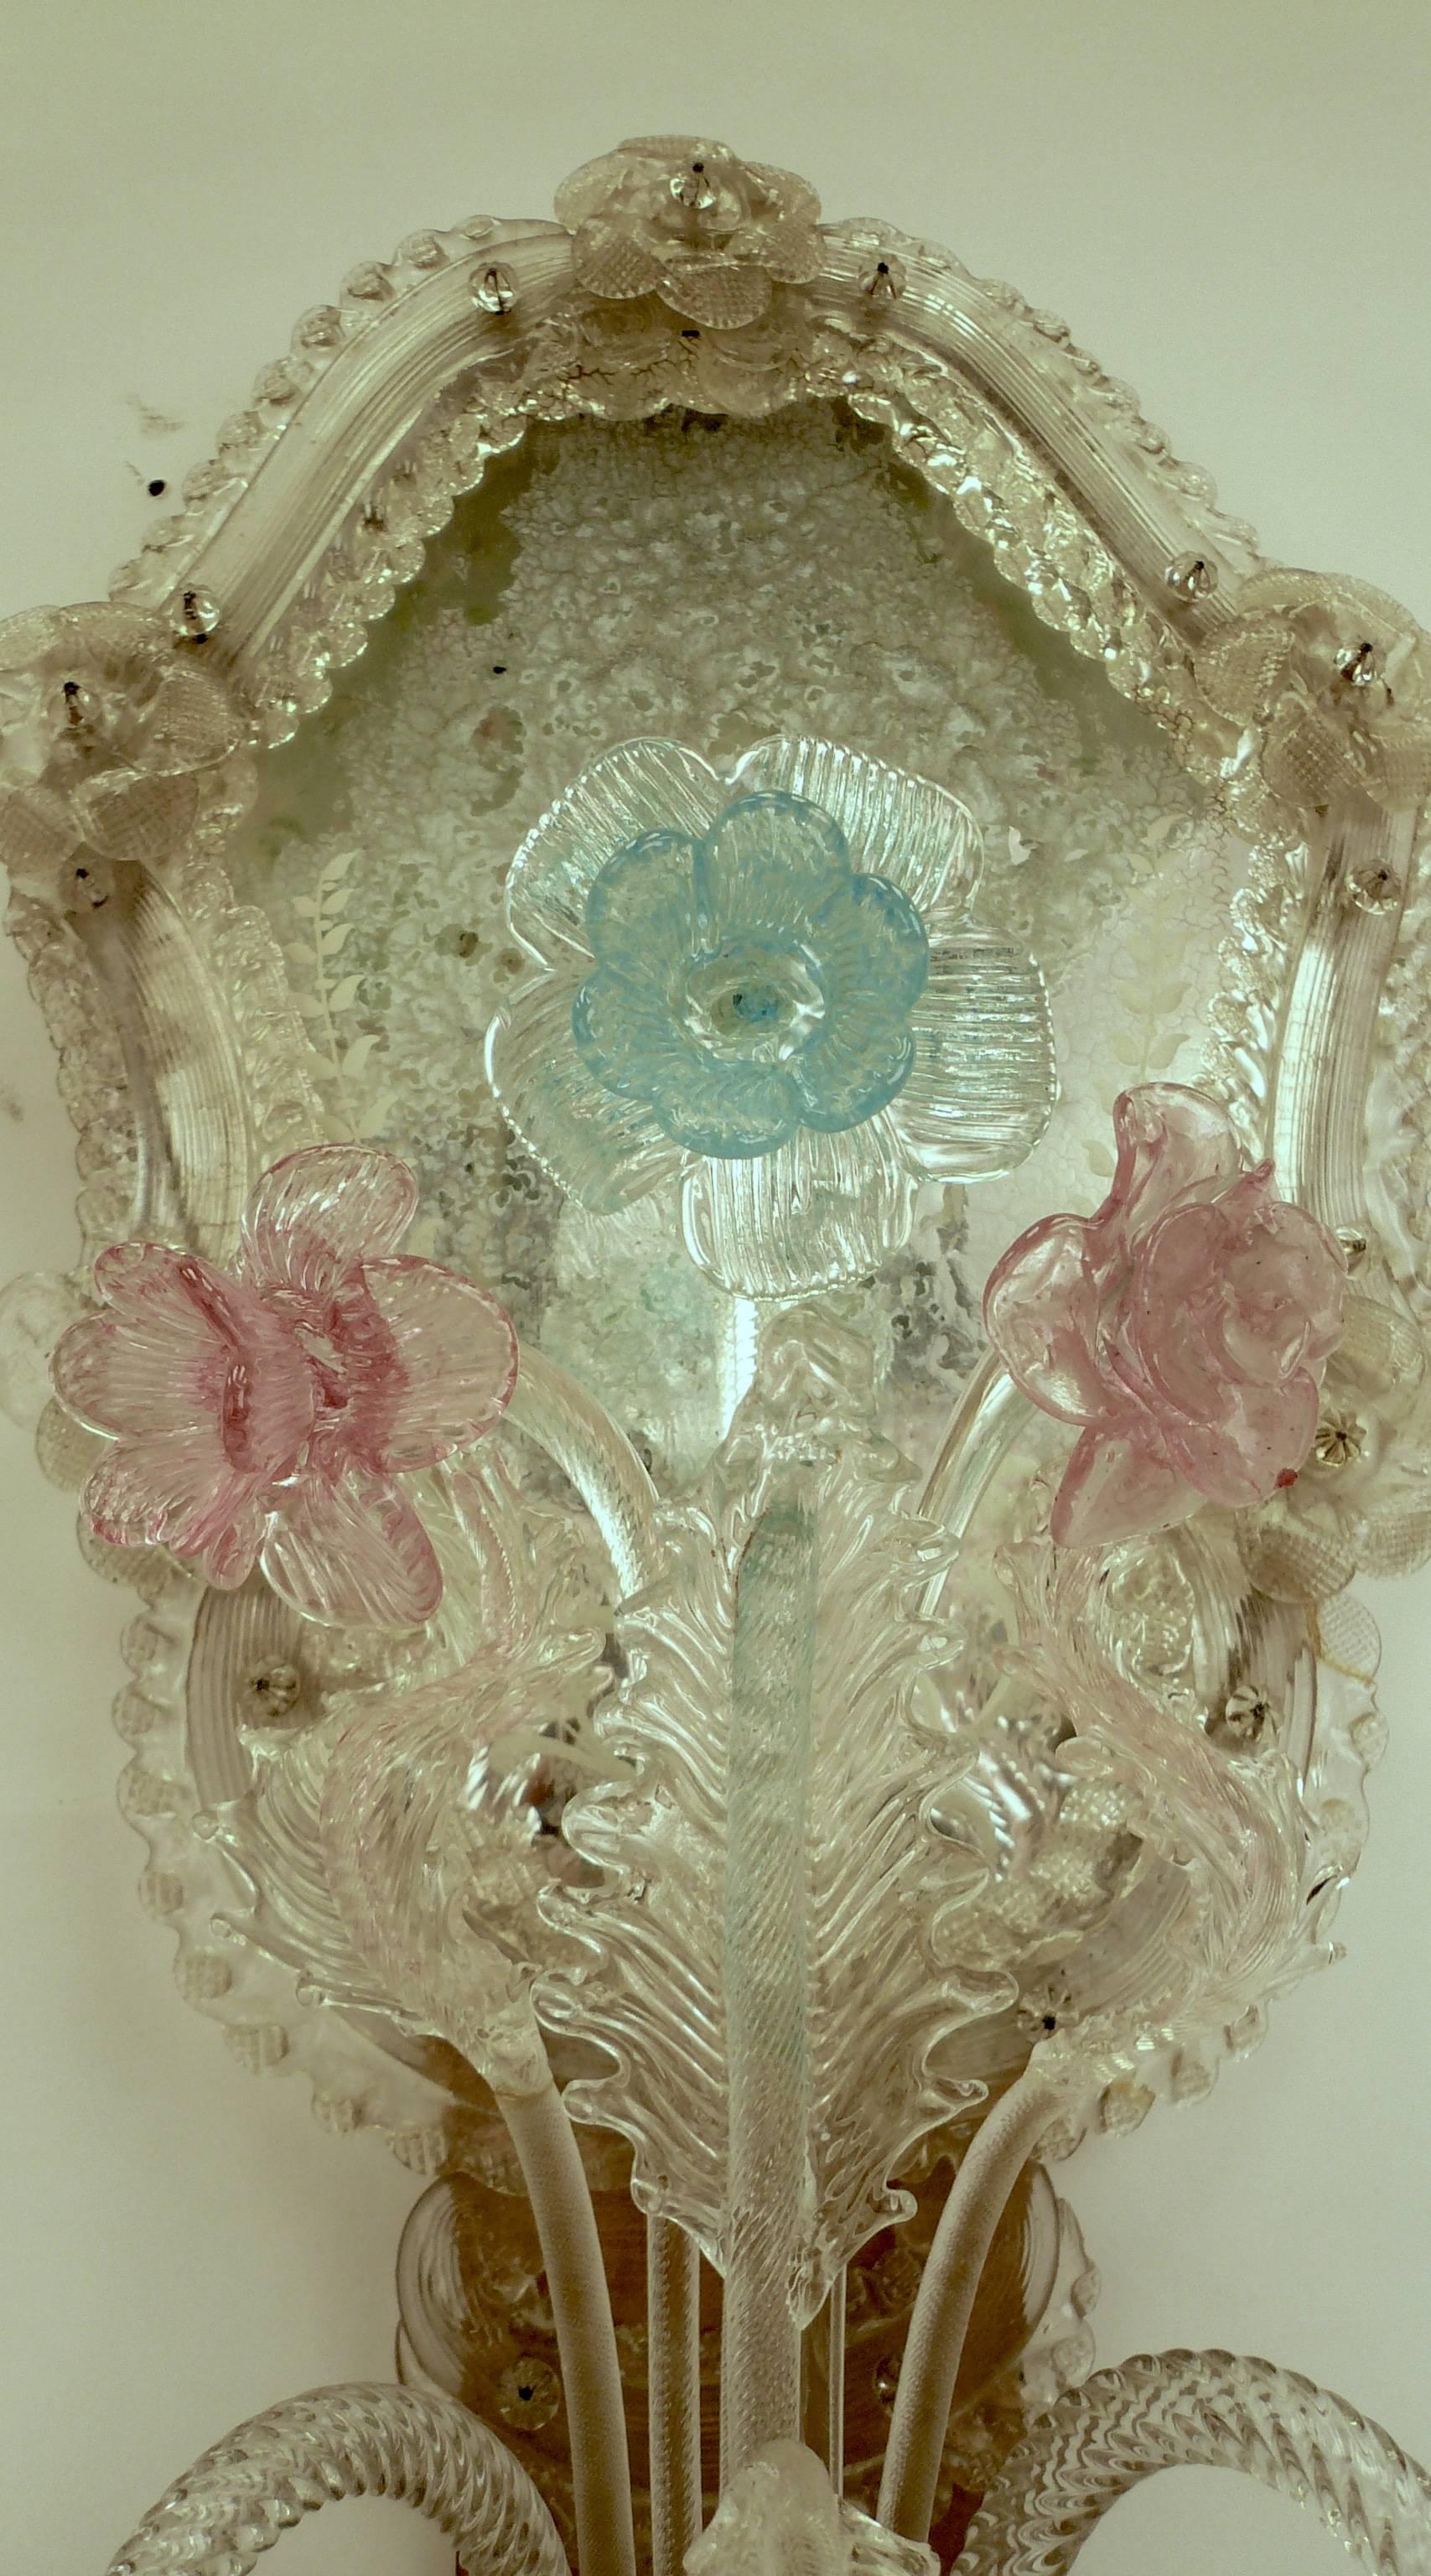 This iconic style of blown Venetian glass has been made on the island of Murano for centuries. The two-arm sconces feature clear, pink, and blue glass floral elements, and mirrored cartouche backs.